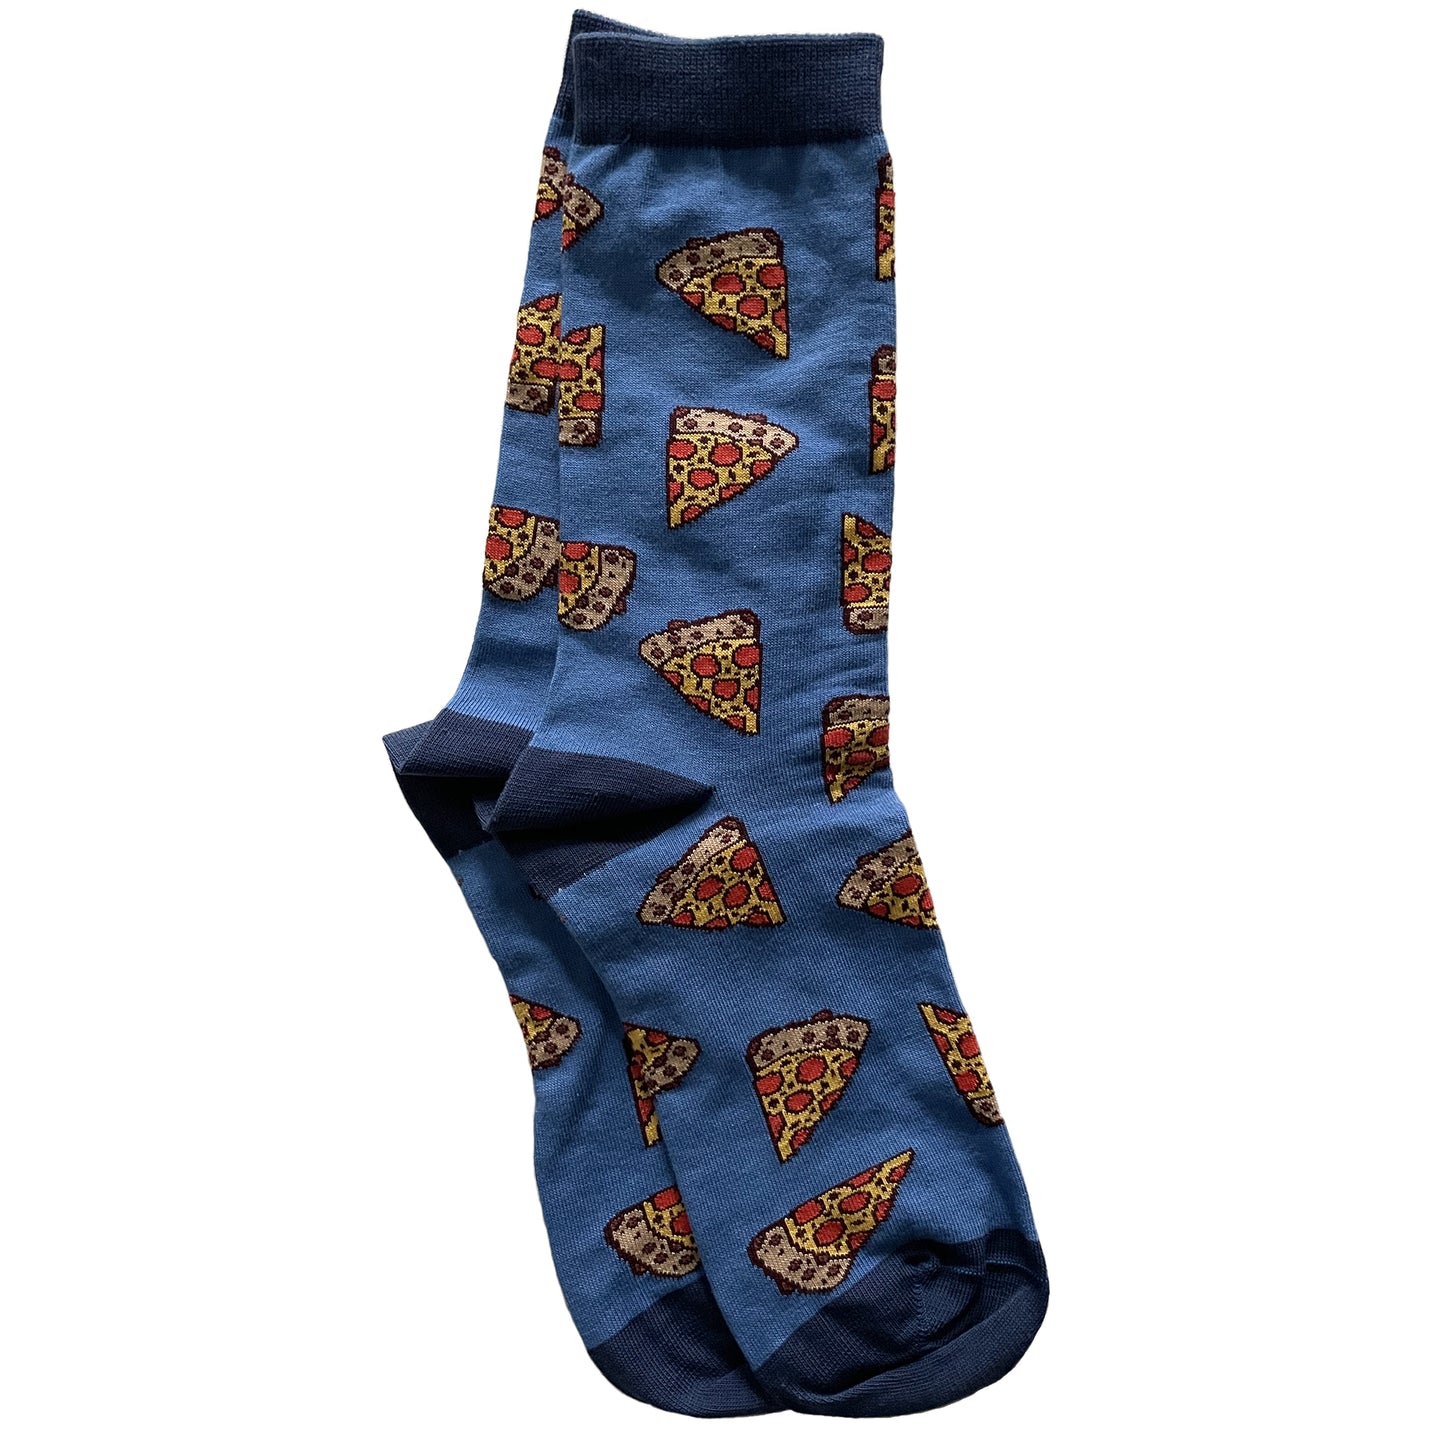 A blue pair of socks with darker blue heels, toes and cuffs is patterned with slices of pepperoni pizza.